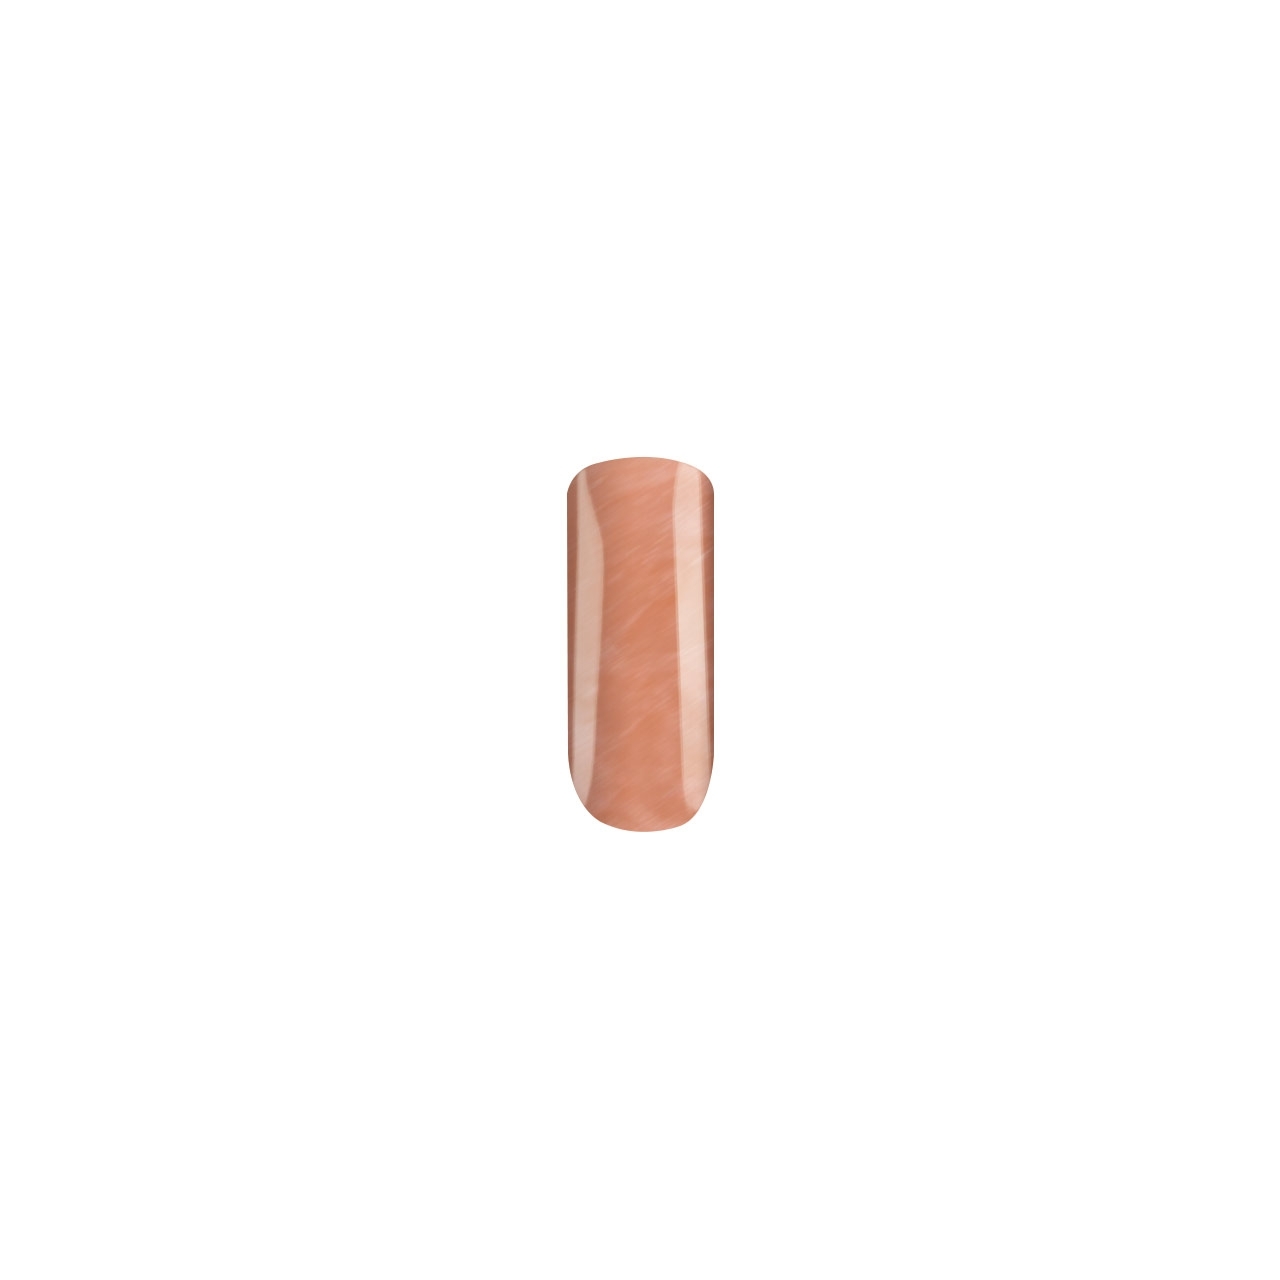 BAEHR BEAUTY CONCEPT - NAILS Nagellack pfirsich nude pearl 11 ml